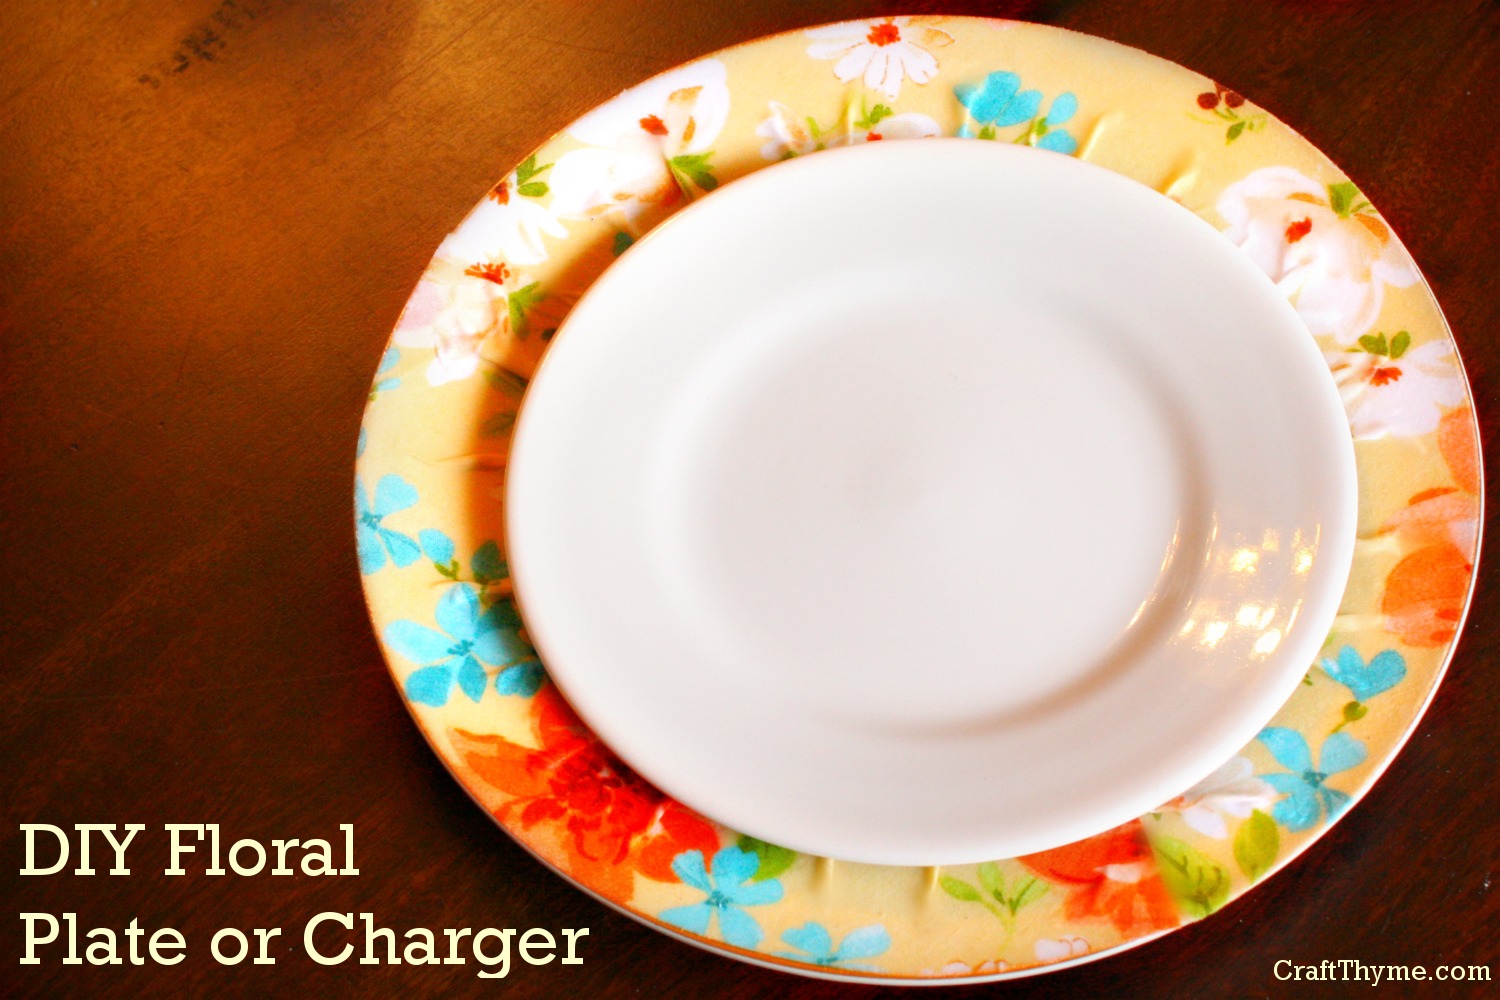 DIY floral Plate or Charger for Easter